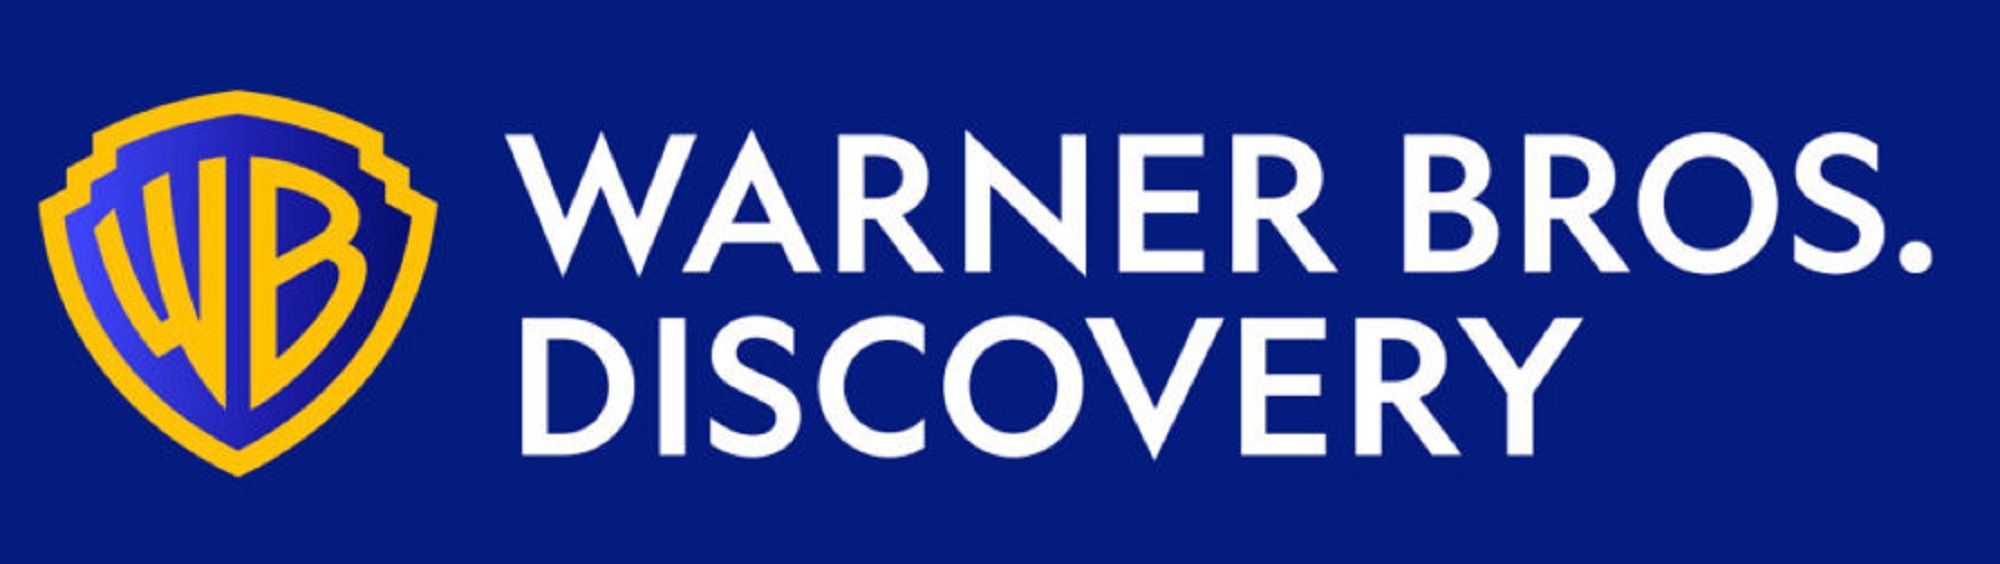 Warner Bros. Discovery hiring Business Analyst